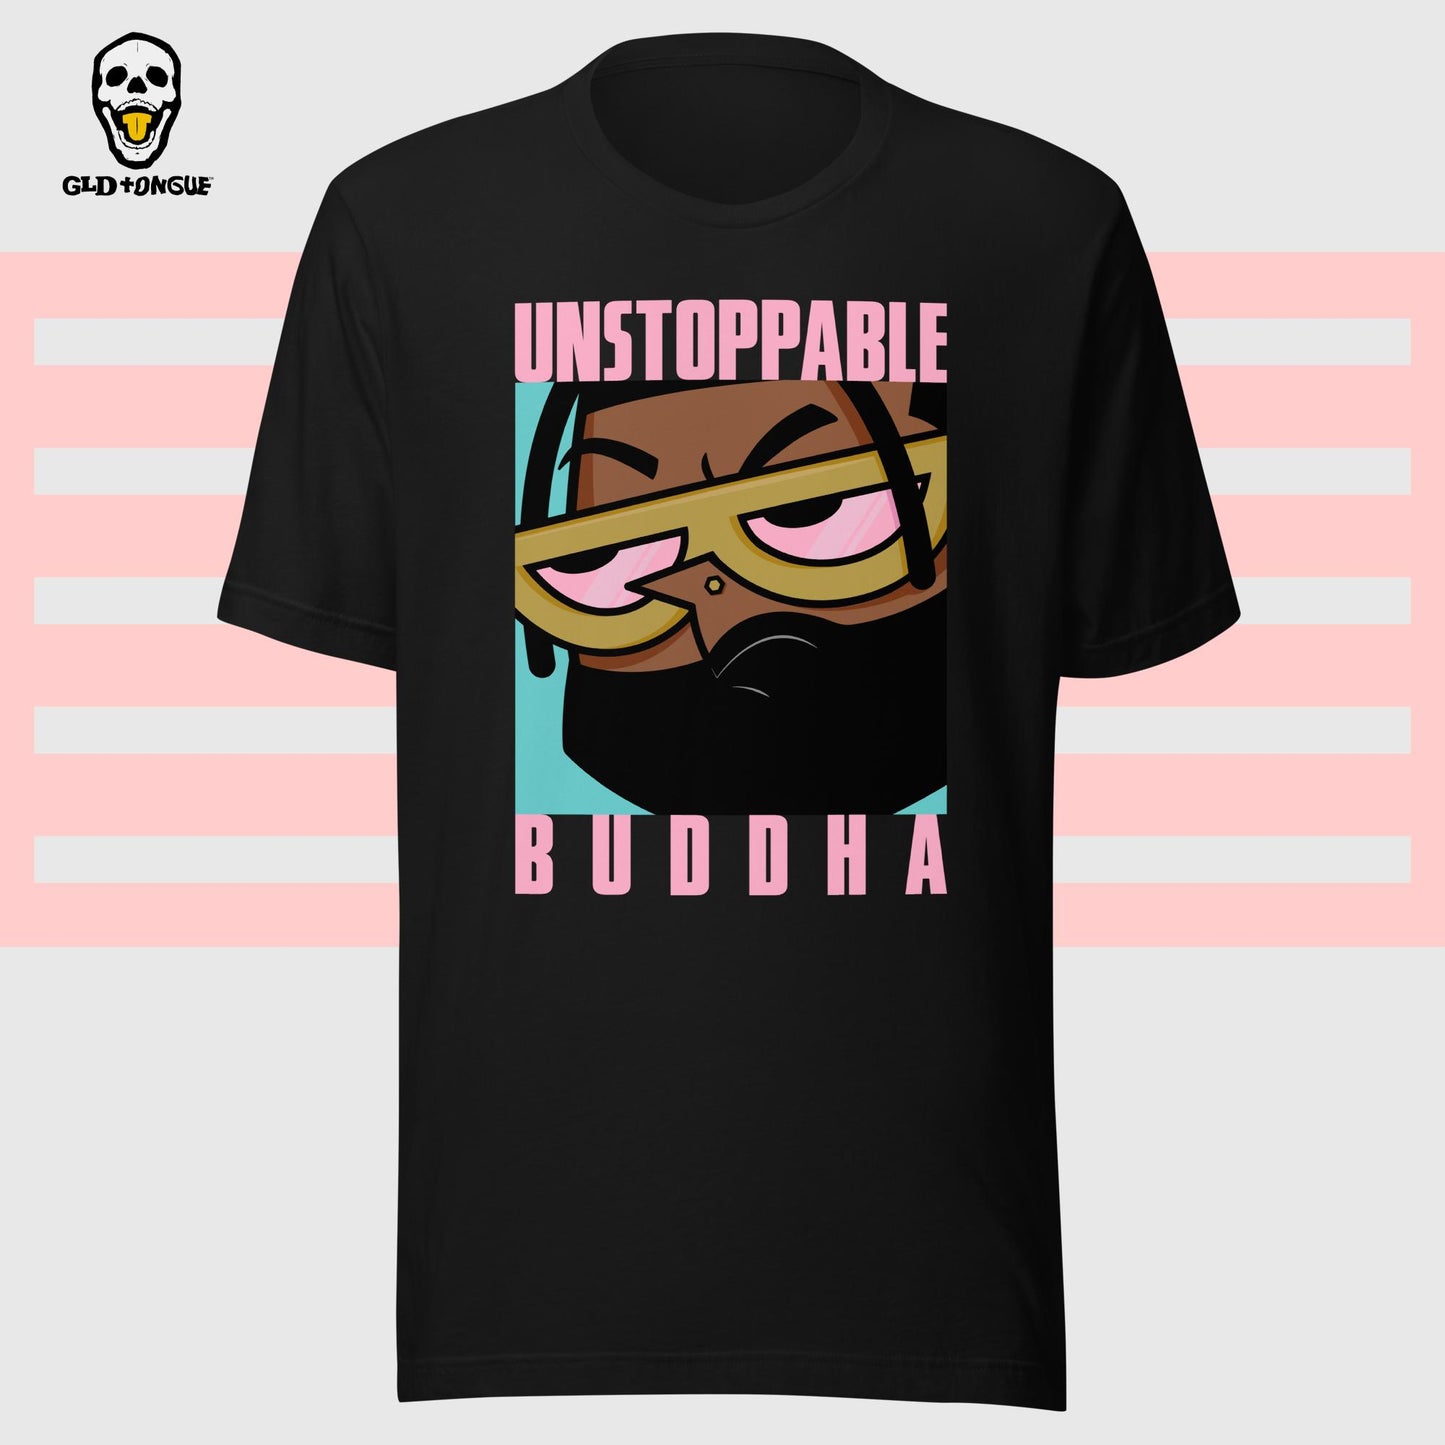 Flexter's Lab (Unstoppable Buddha) Tee